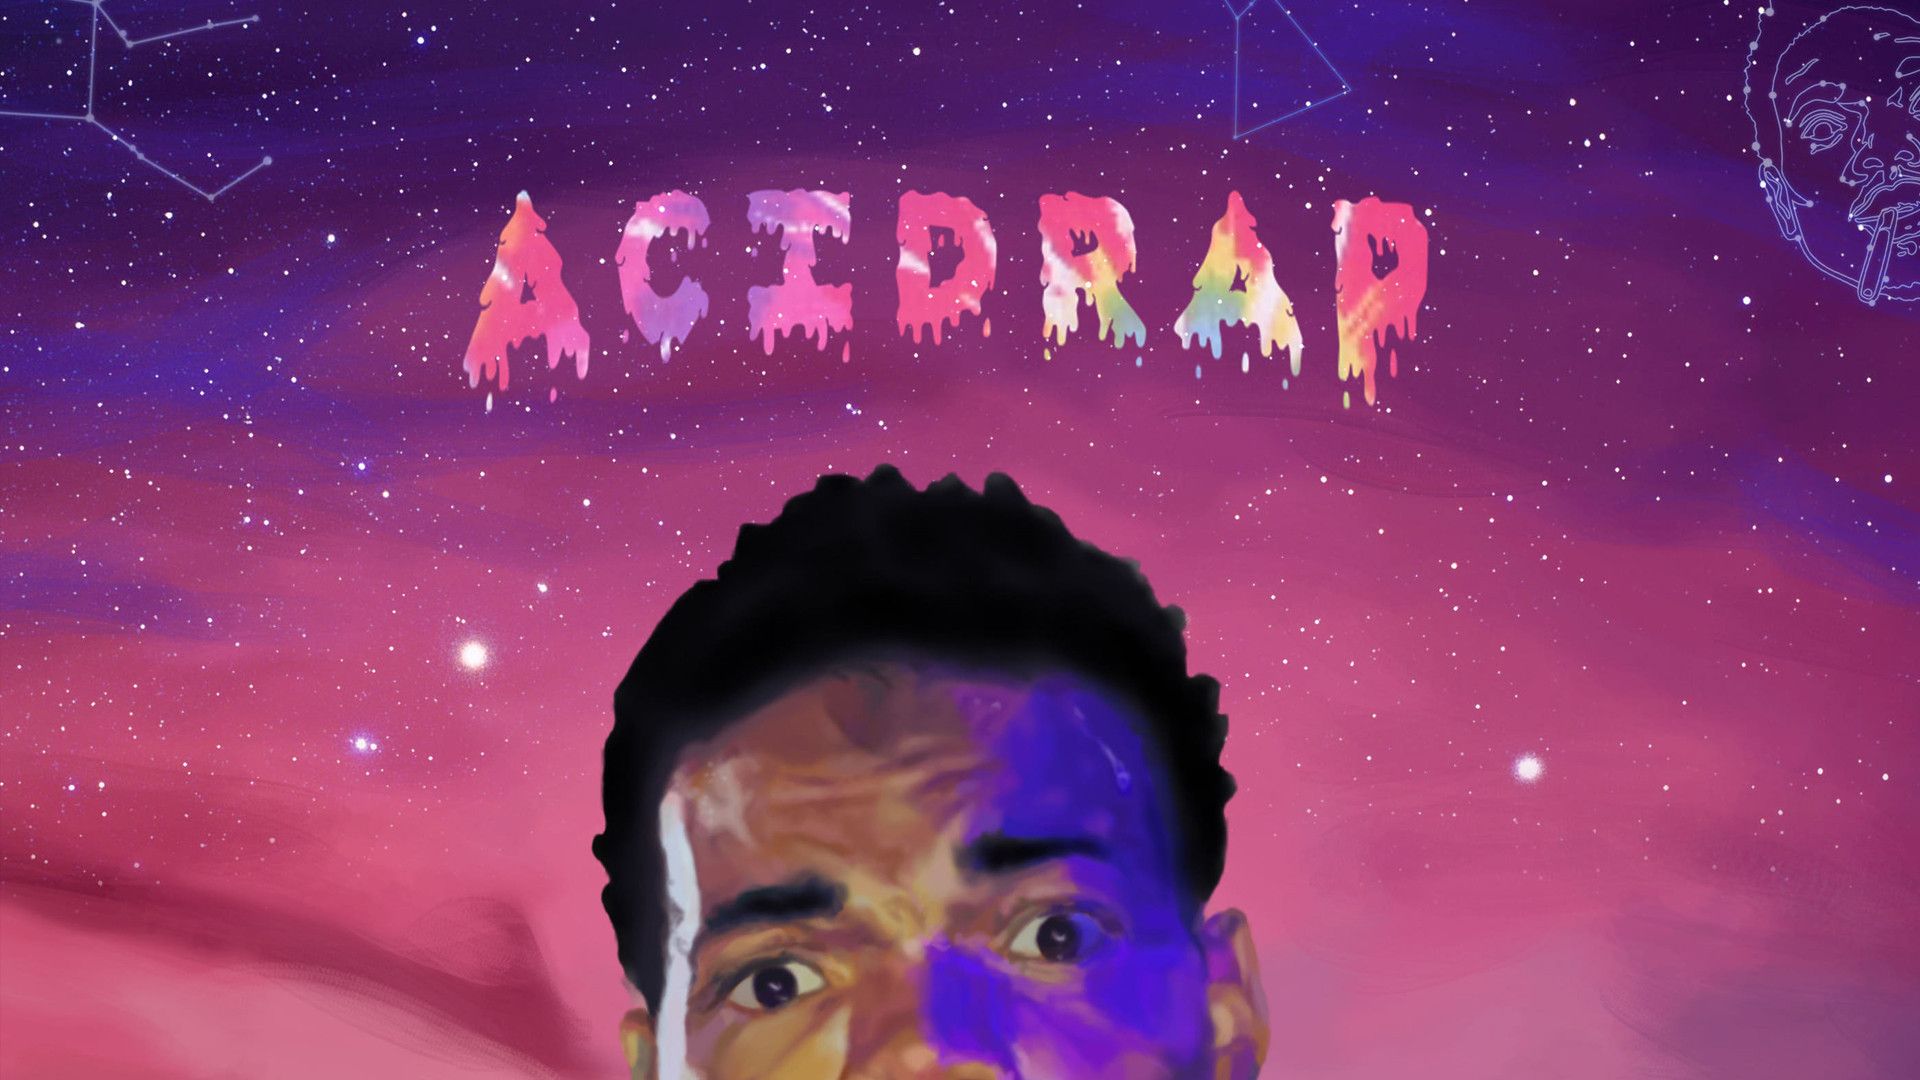 The cover art for the mixtape Acid Rap by Chance the Rapper. - Chance the Rapper